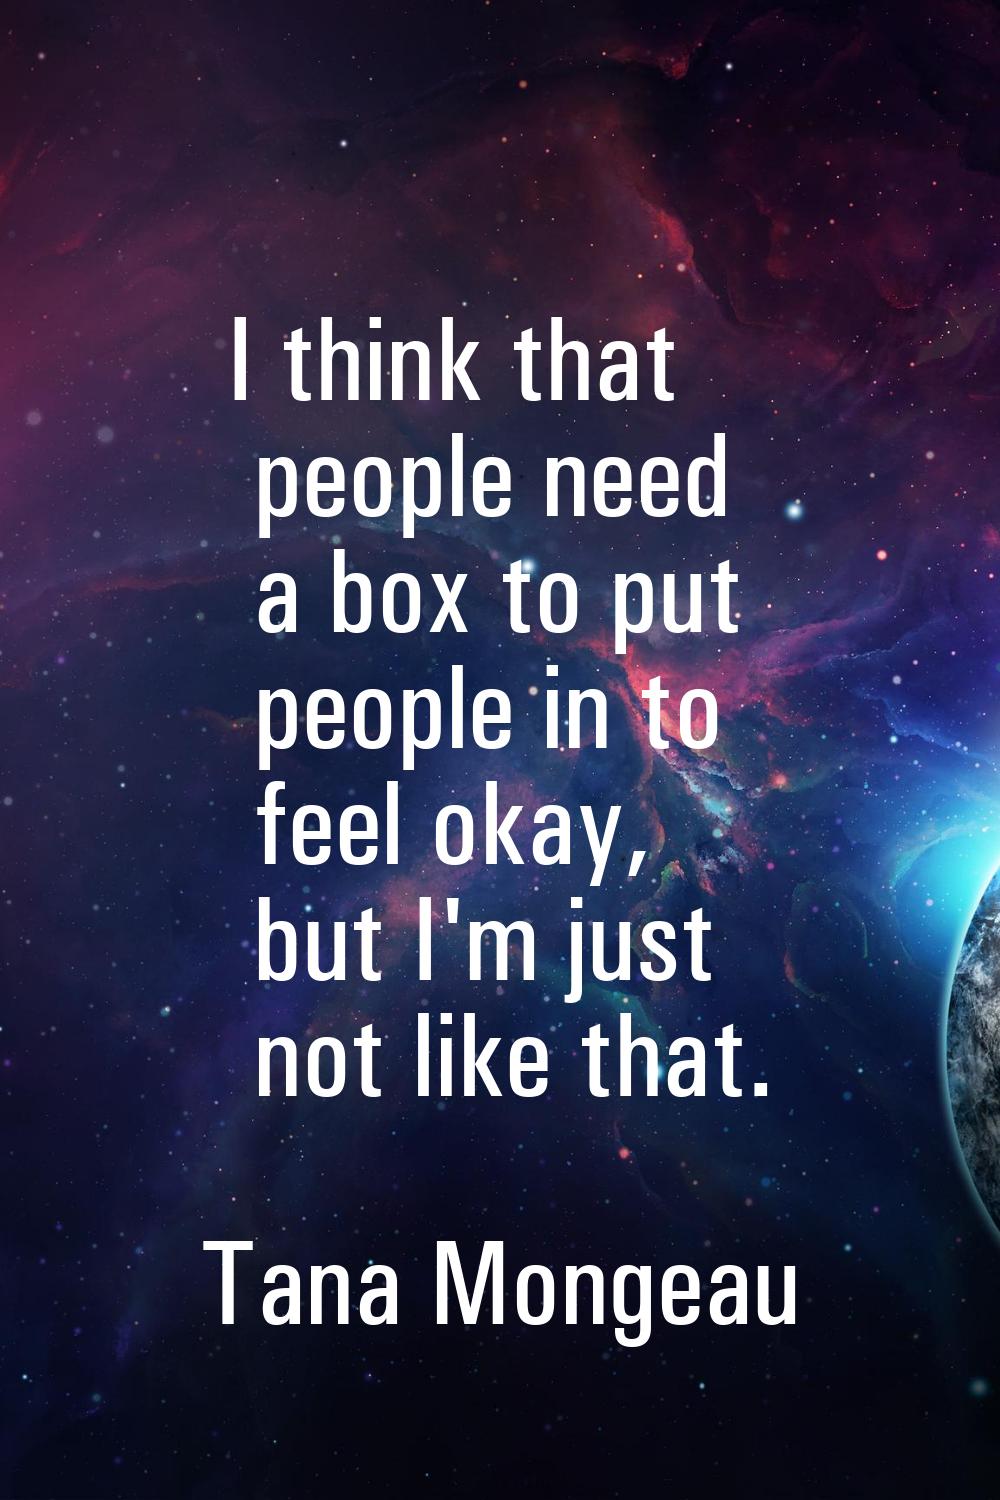 I think that people need a box to put people in to feel okay, but I'm just not like that.